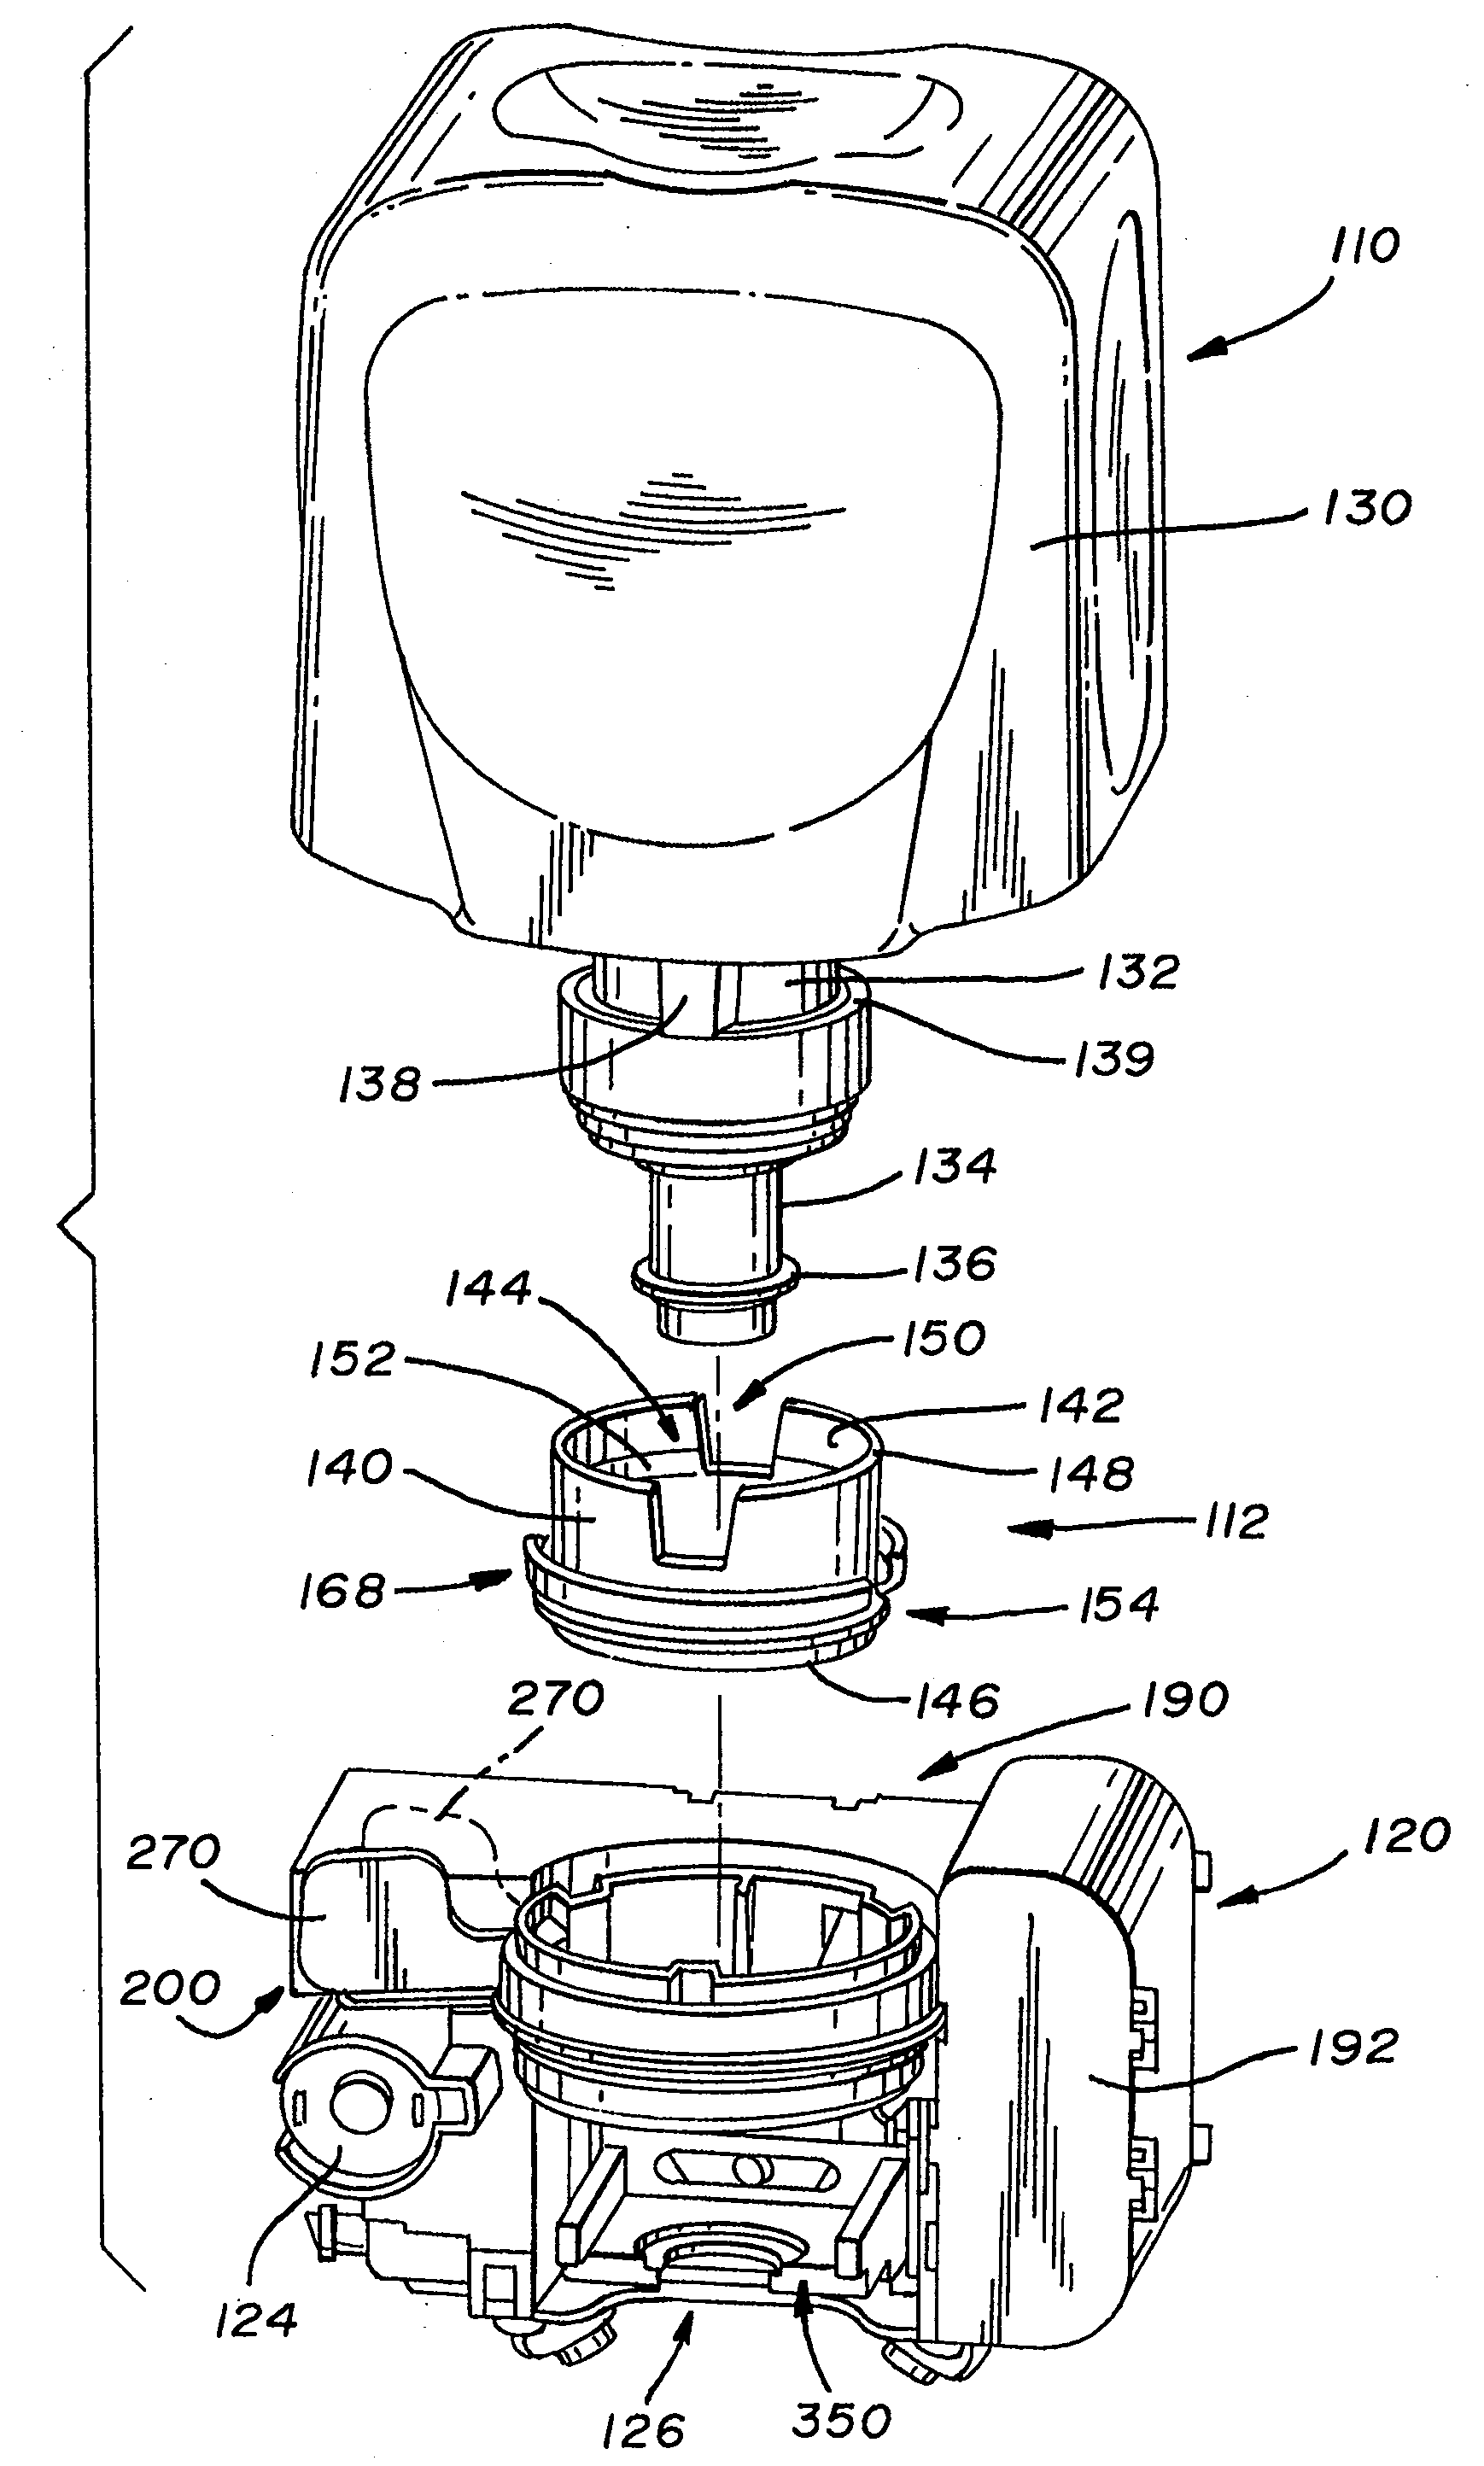 Electronically keyed dispensing systems and related methods utilizing near field frequency response